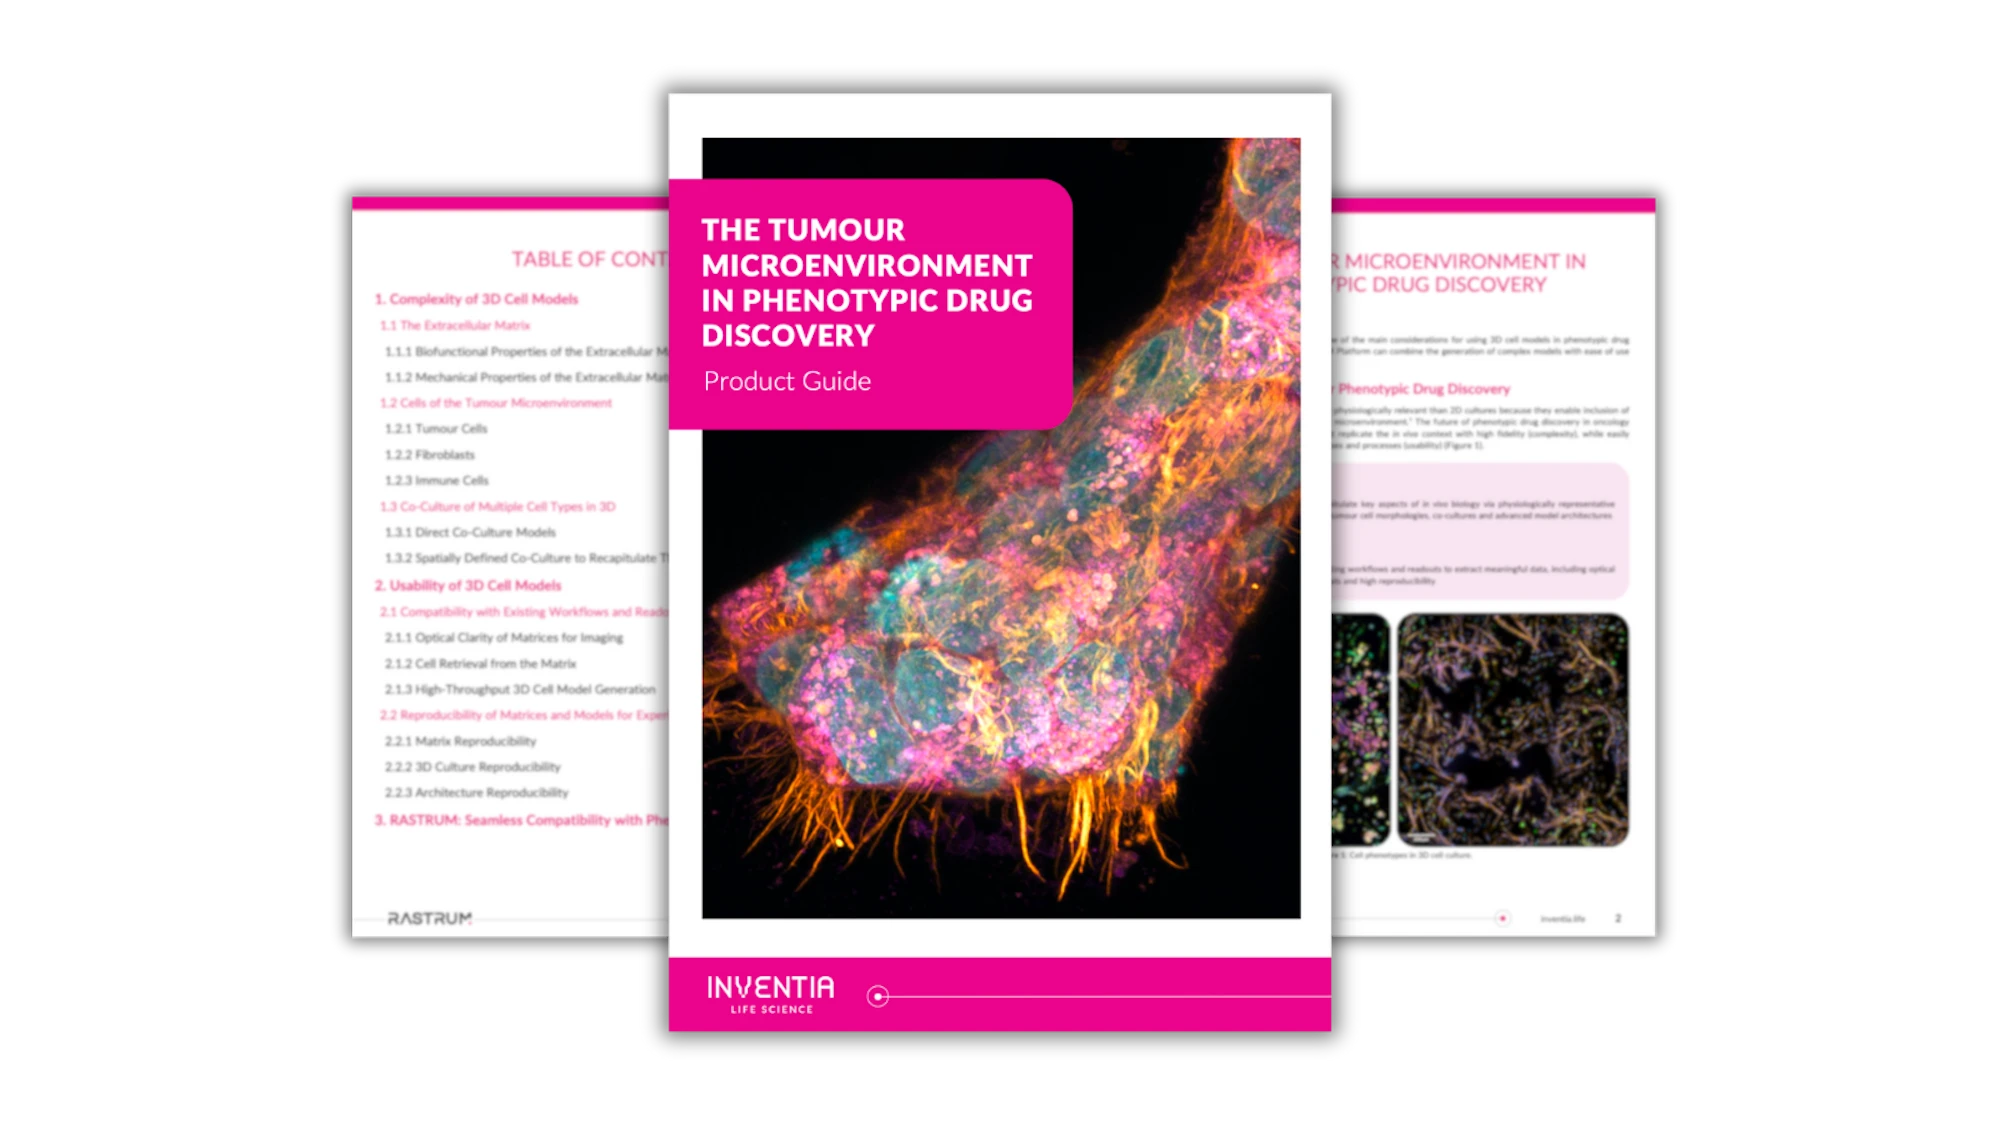 The tumour microenvironment in phenotypic drug discovery